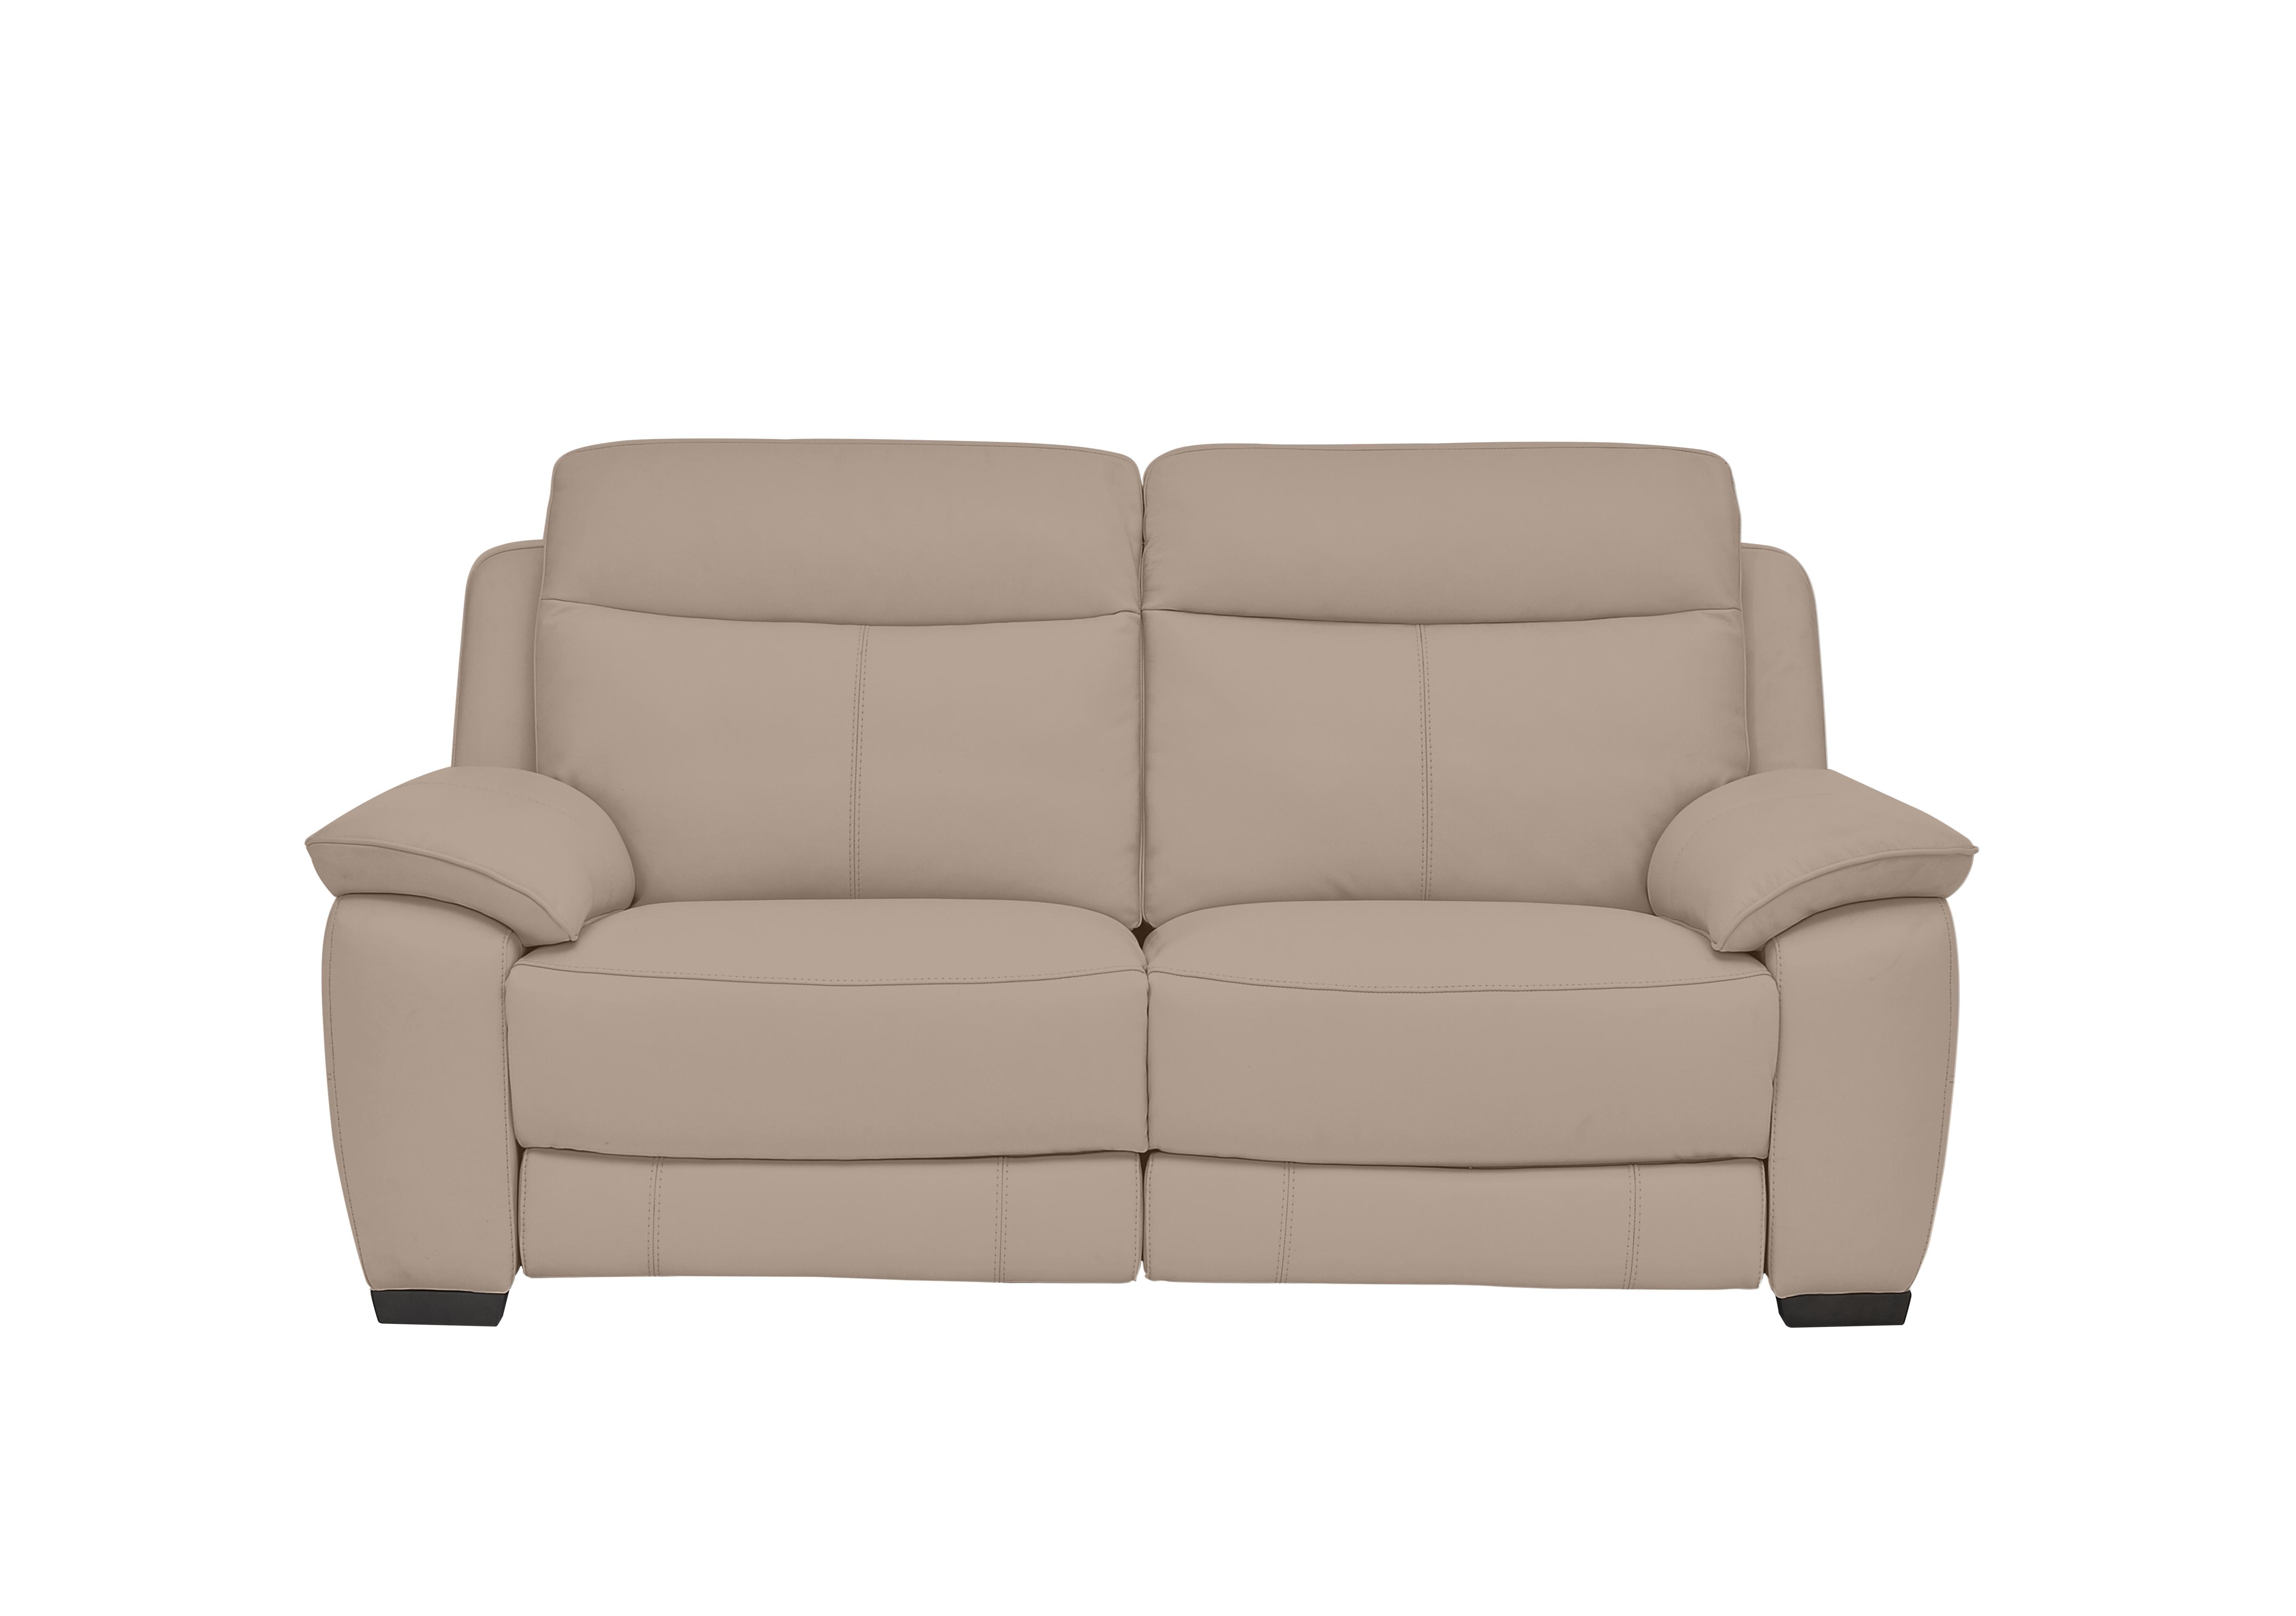 Starlight Express 2 Seater Leather Recliner Sofa with Power Headrests in Bv-039c Pebble on Furniture Village